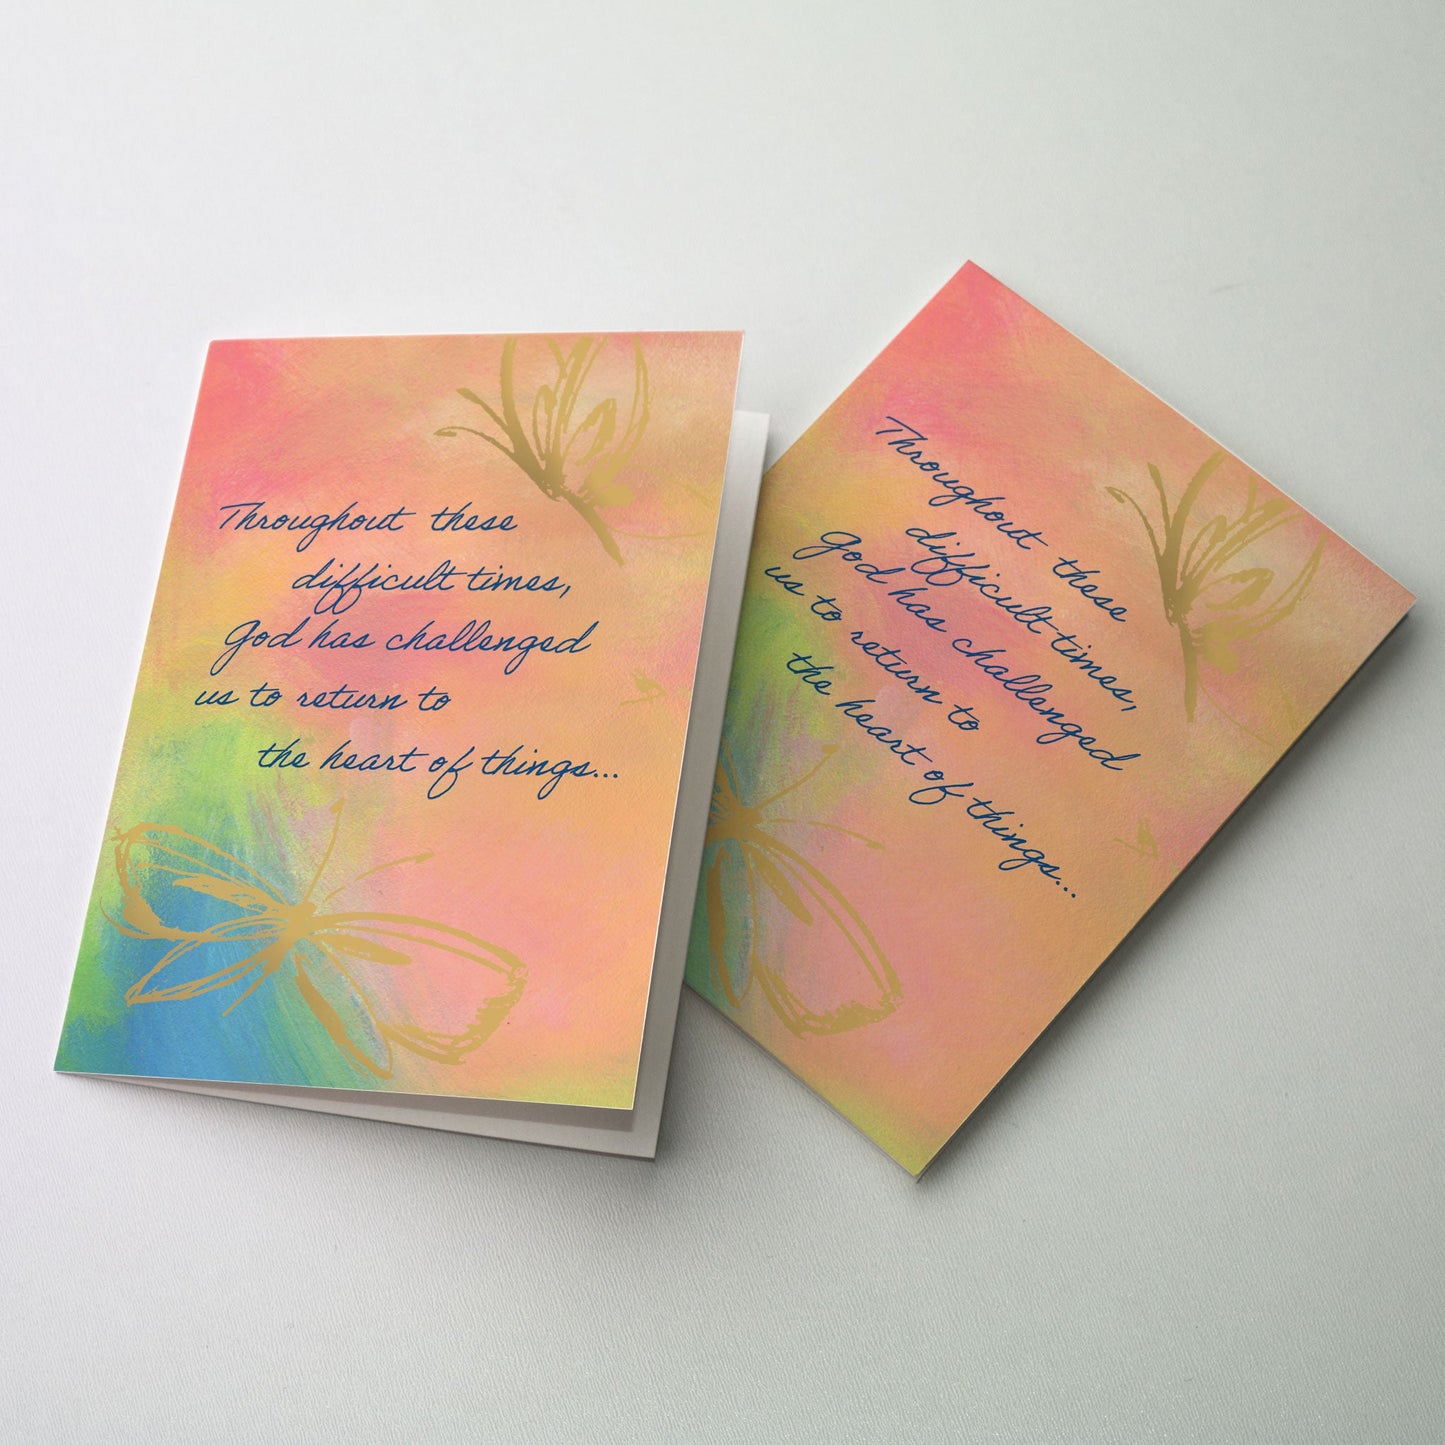 Soft gold images of butterflies on pastel colored background